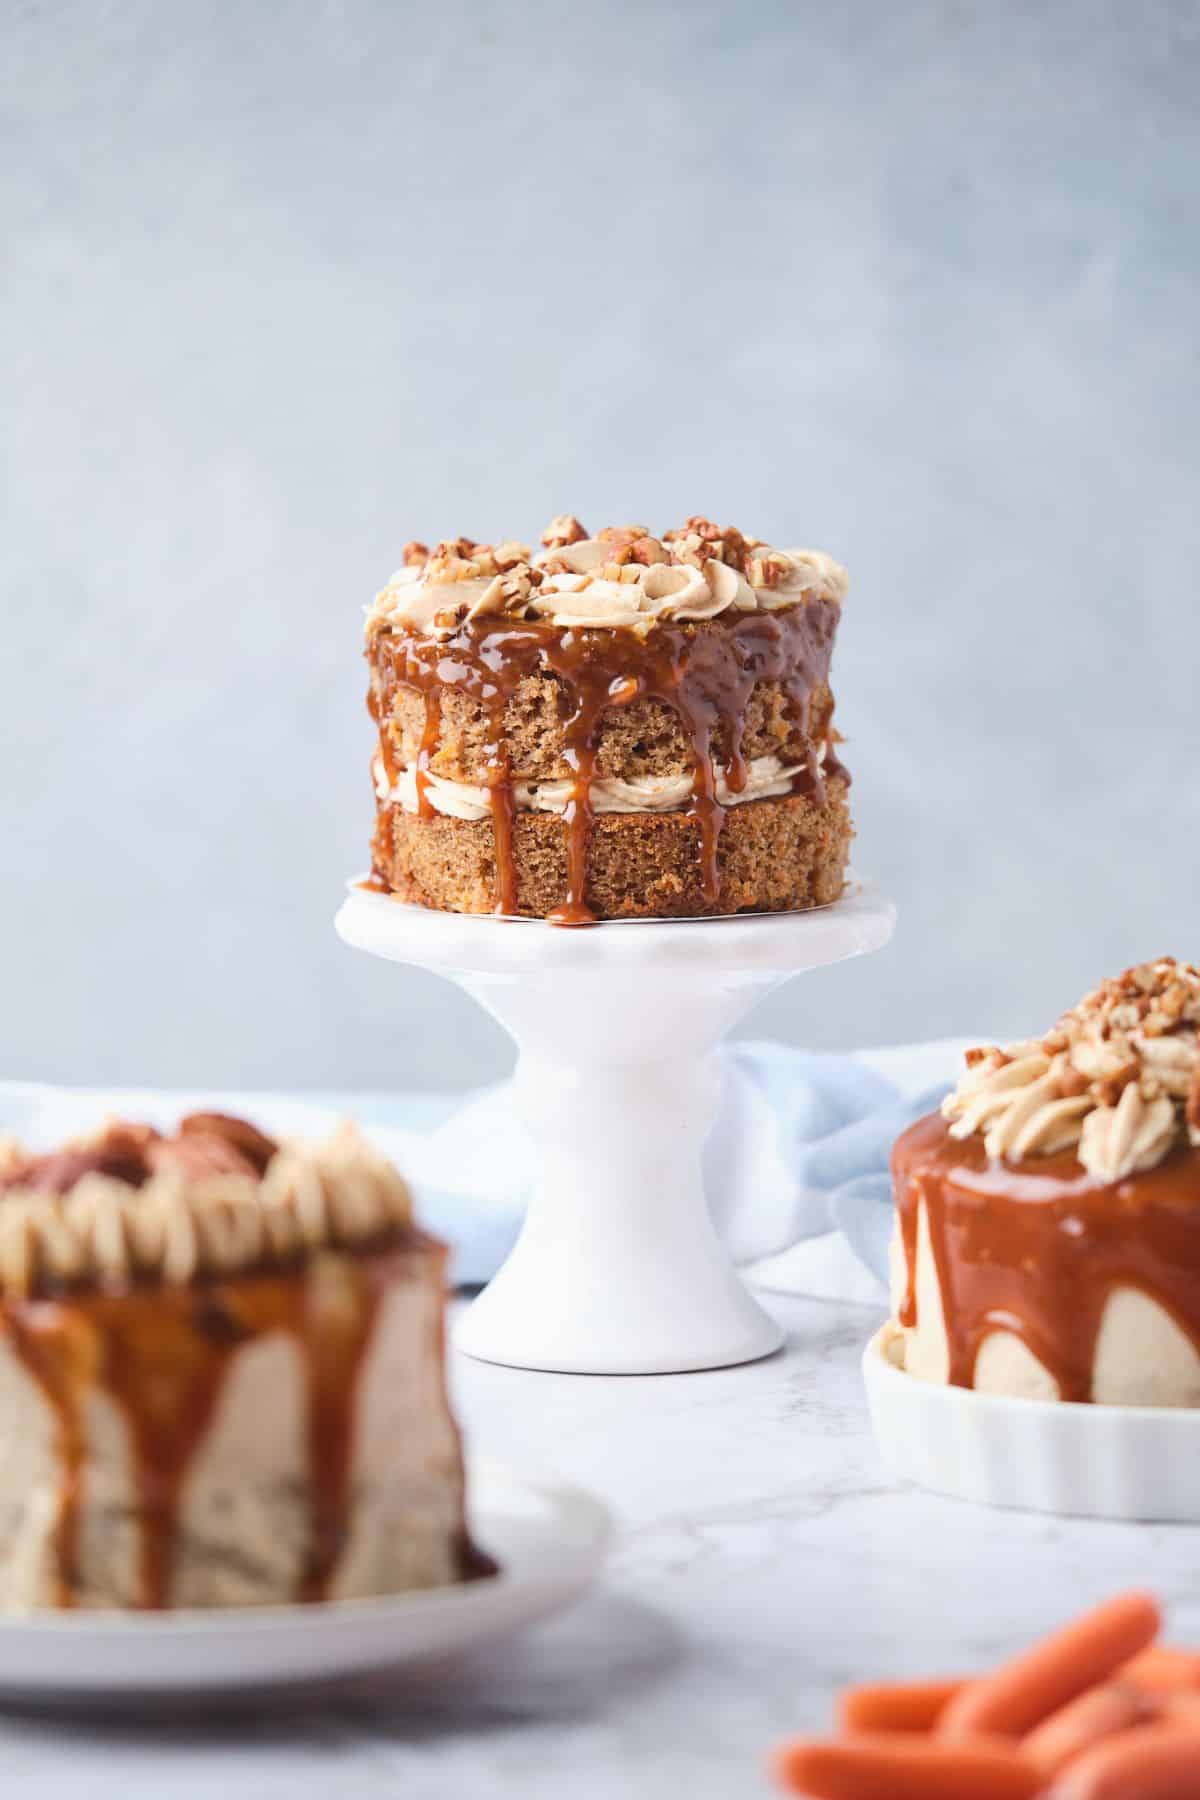 3 mini carrot cakes decorated with caramel drizzle and pecans.